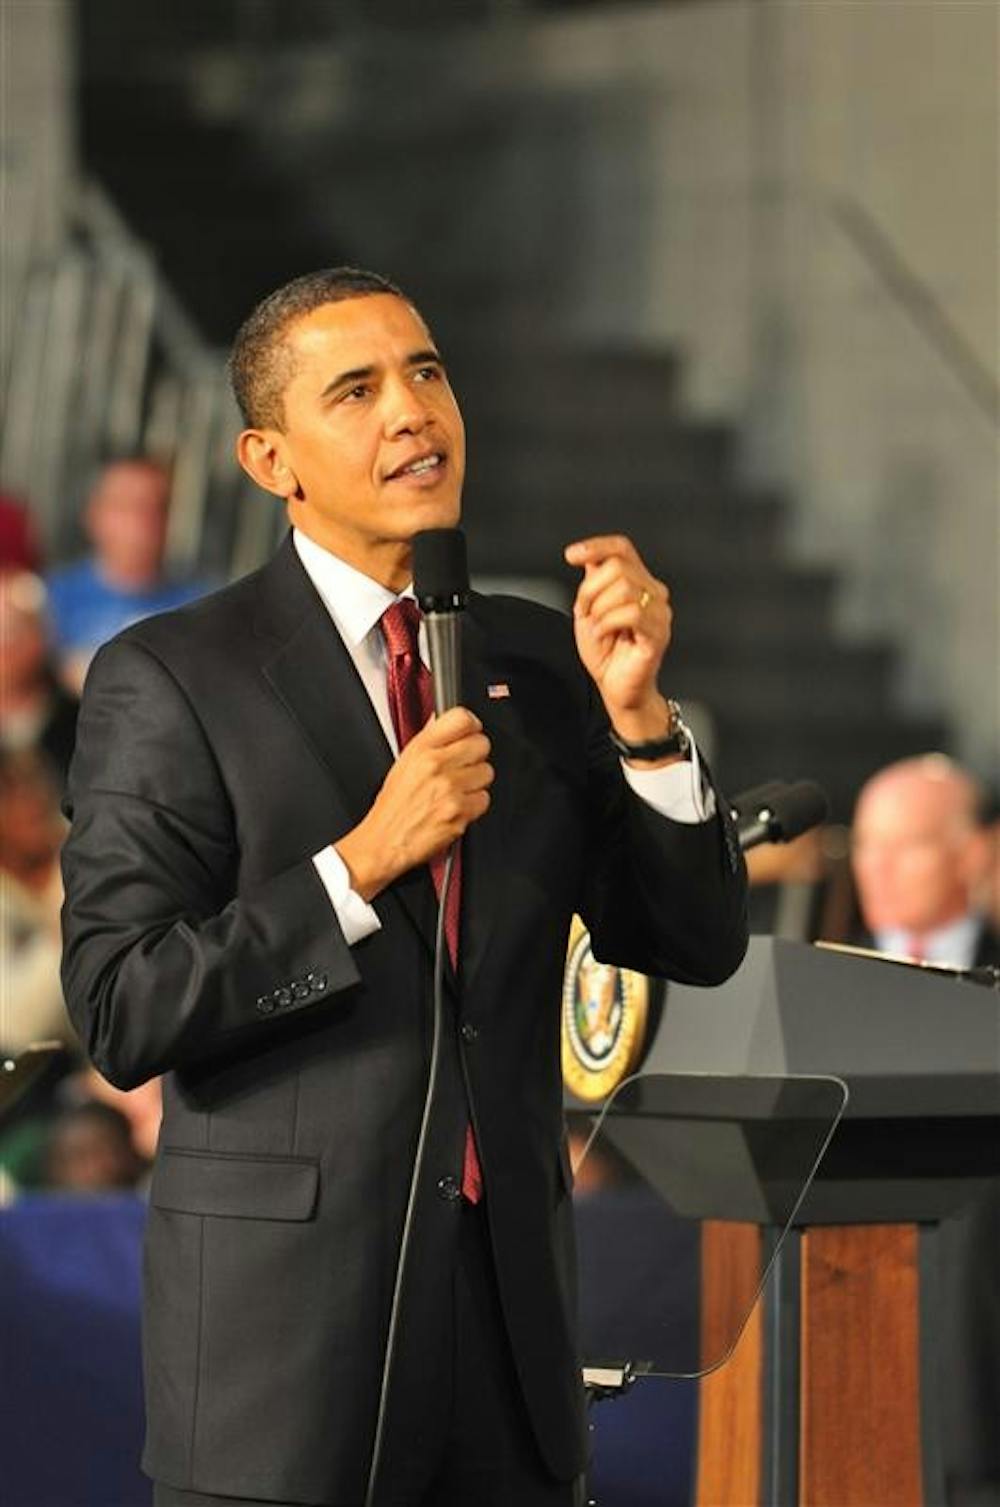 President Barack Obama addresses the audience at Concord High School in Elkhart, Ind. on Monday. Obama’s town hall meeting addressed issues concerning the proposed stimulus package.